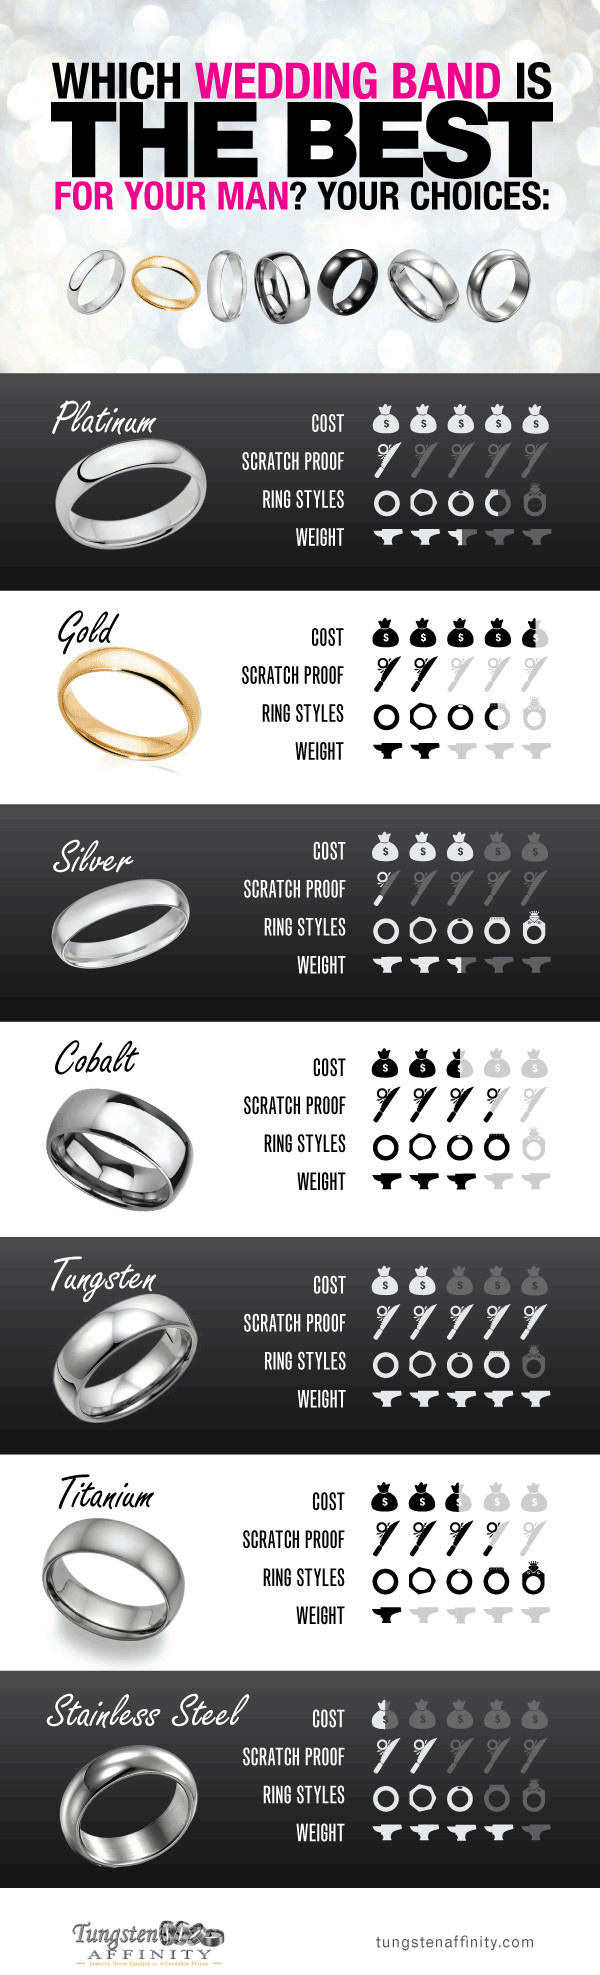 Wedding Ring Metals
 Find out What Metal is the Best for Your Man s Wedding Band